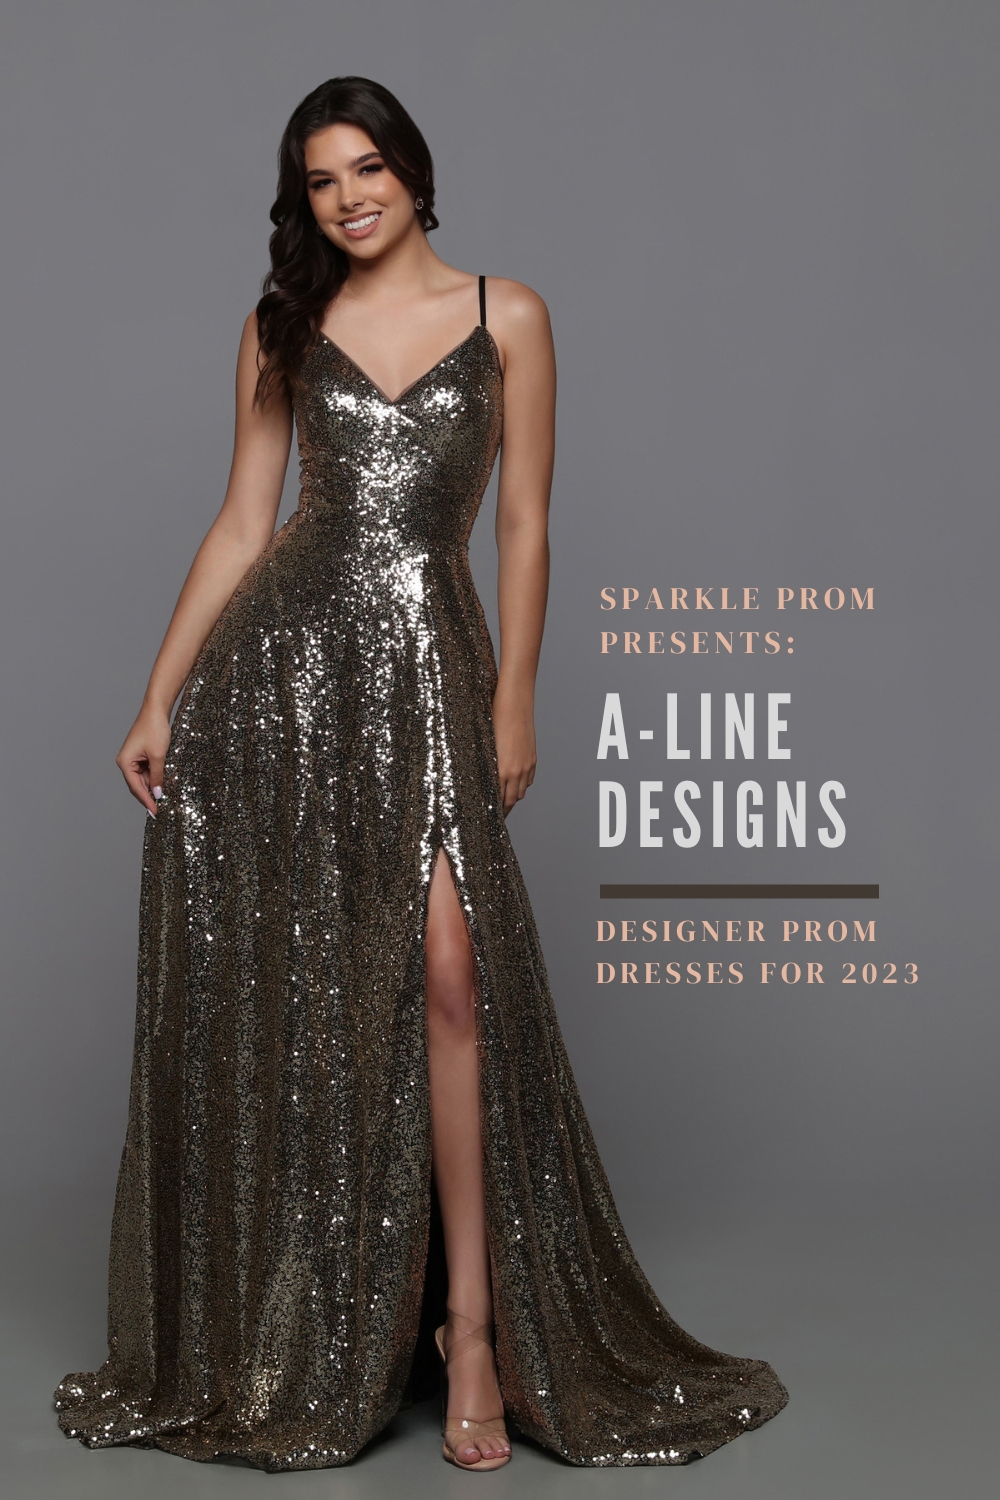 A-Line Prom Dresses for 2023